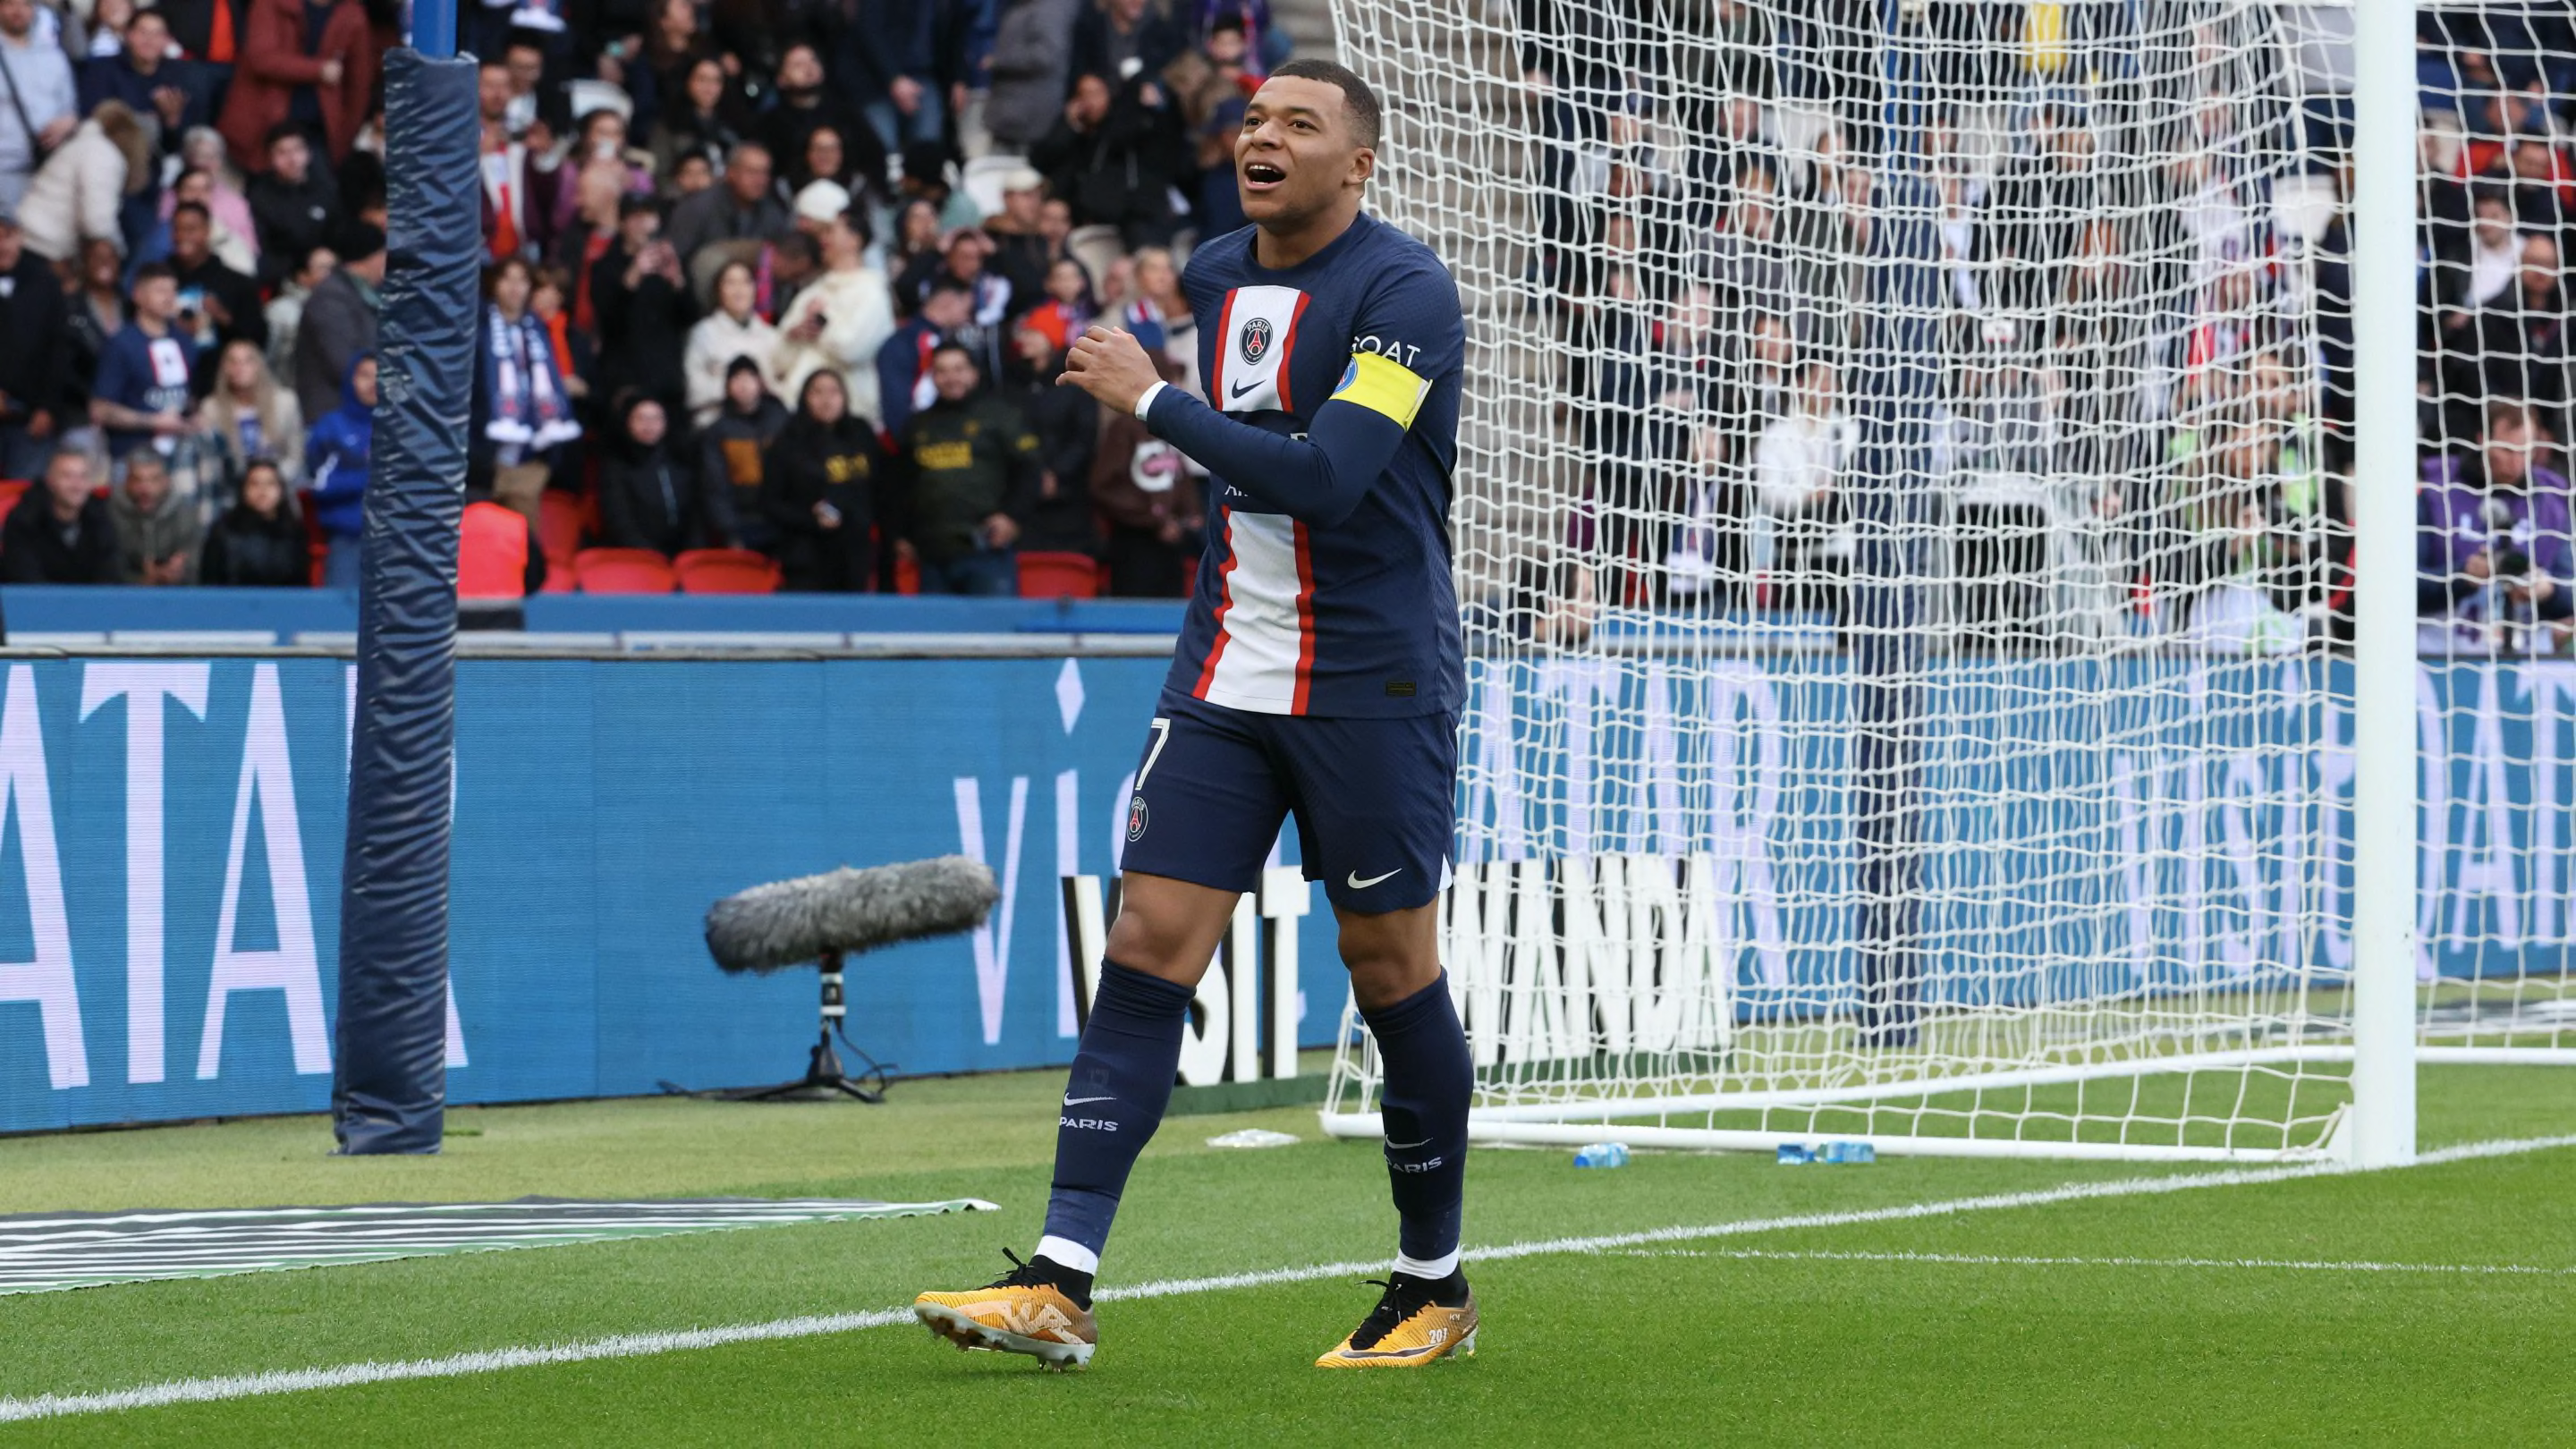 Didier Deschamps plays down reports Kylian Mbappe will be named France captain